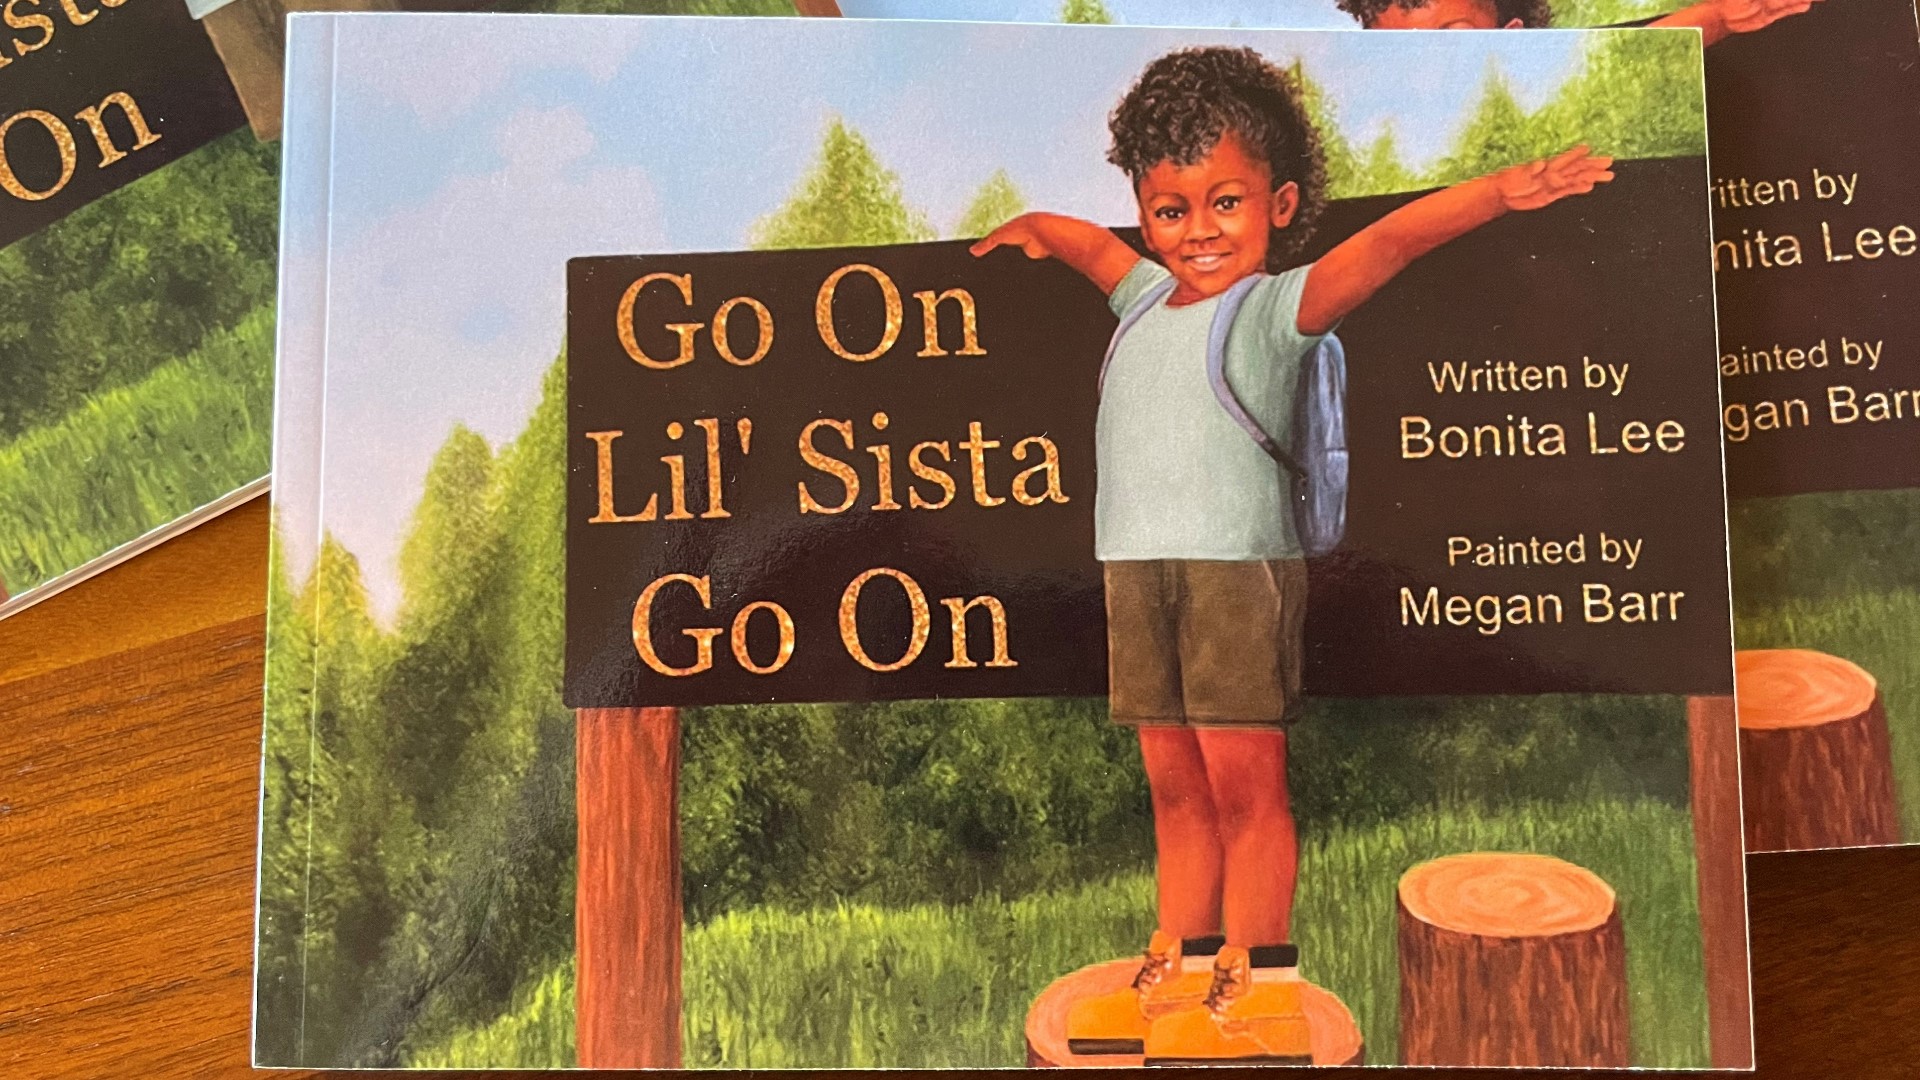 Bonita Lee's "Go On Lil Sista Go On" is the book she wanted to read when she was a child. #k5evening